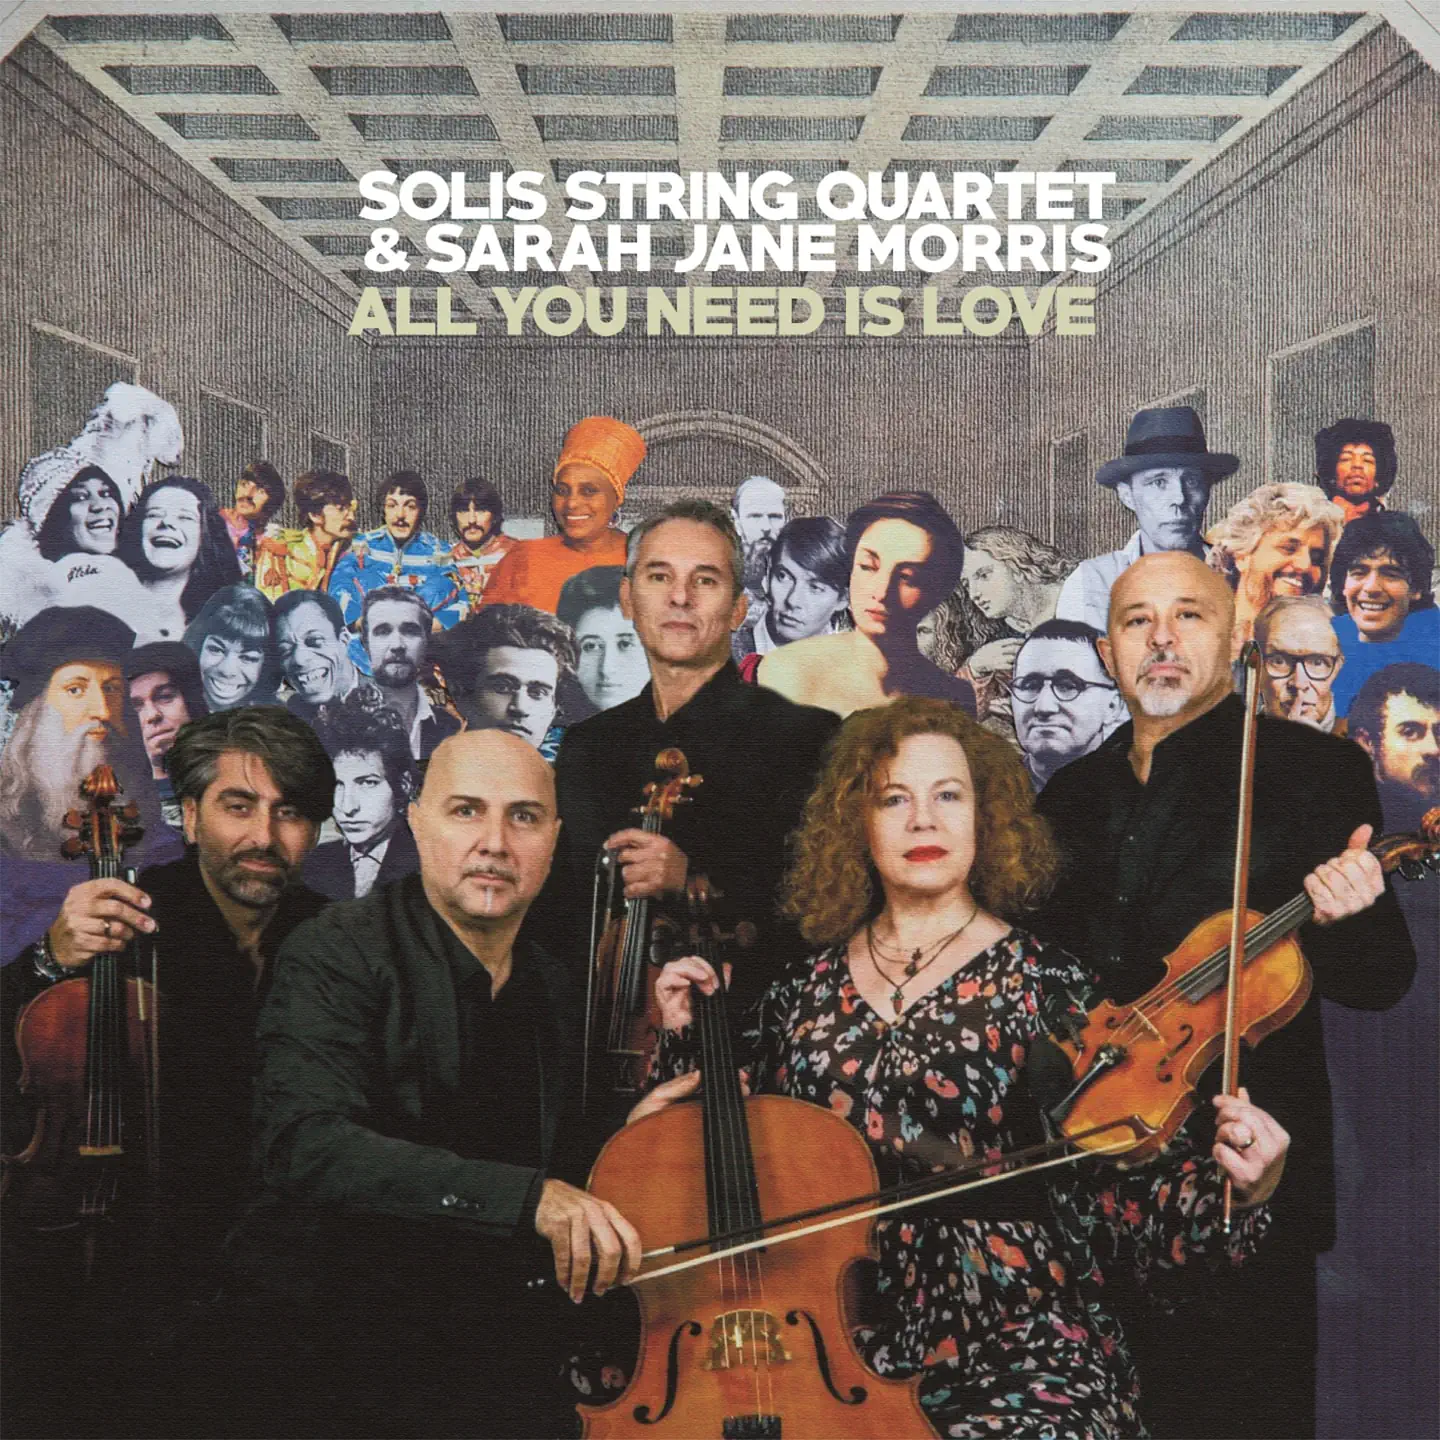 Solis string quartet - All you need is love